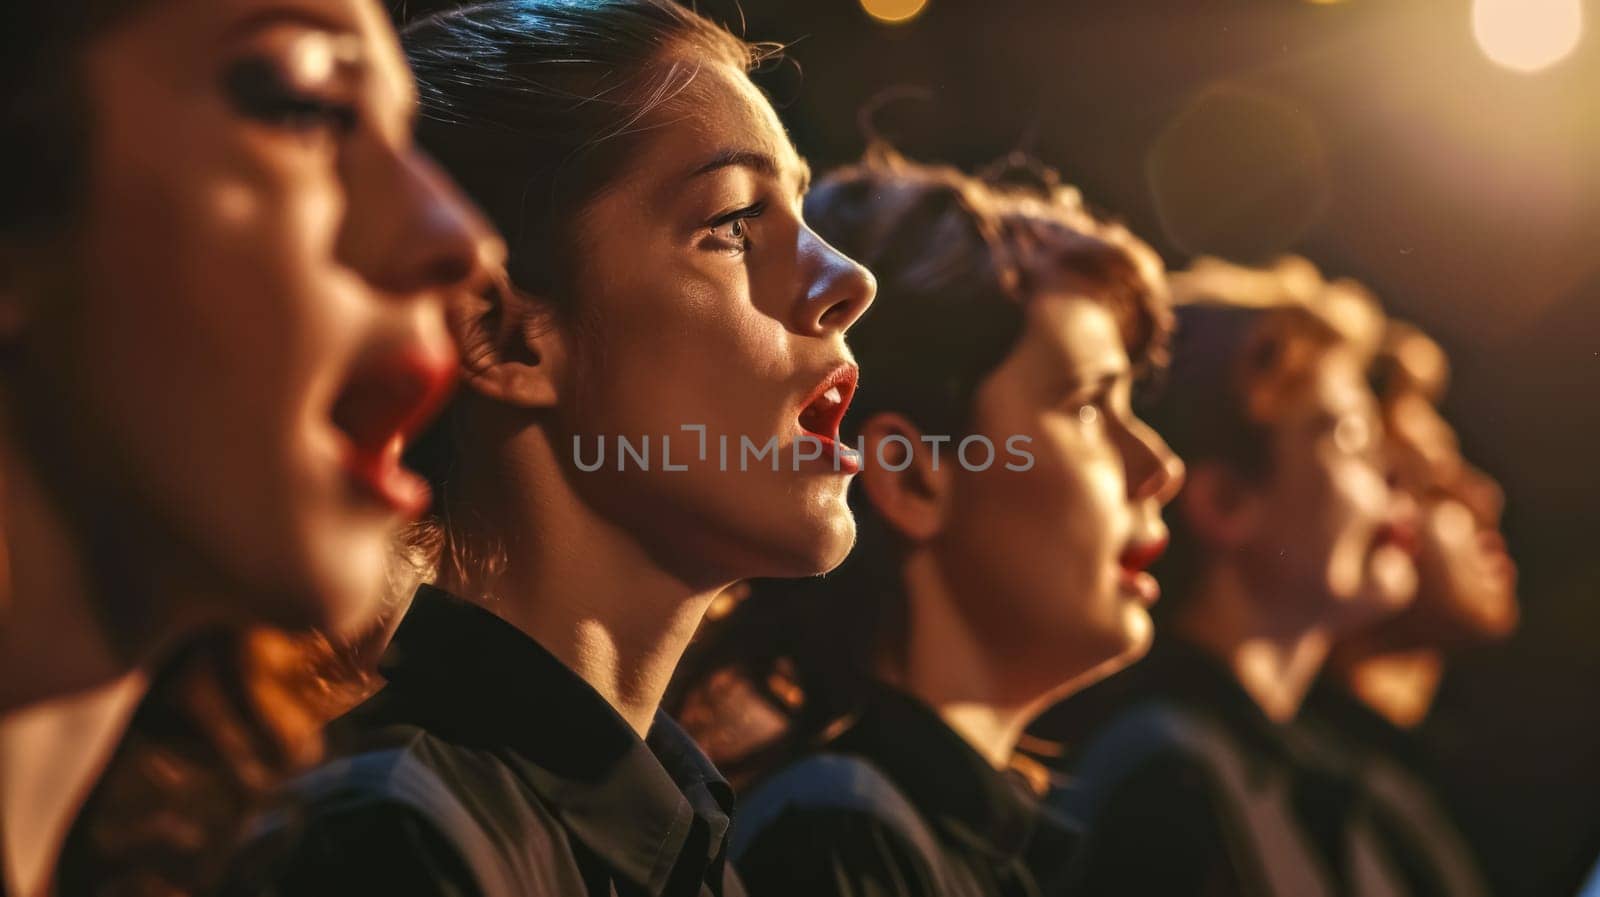 Profile view of a female choir singing passionately on stage under warm lighting by Edophoto